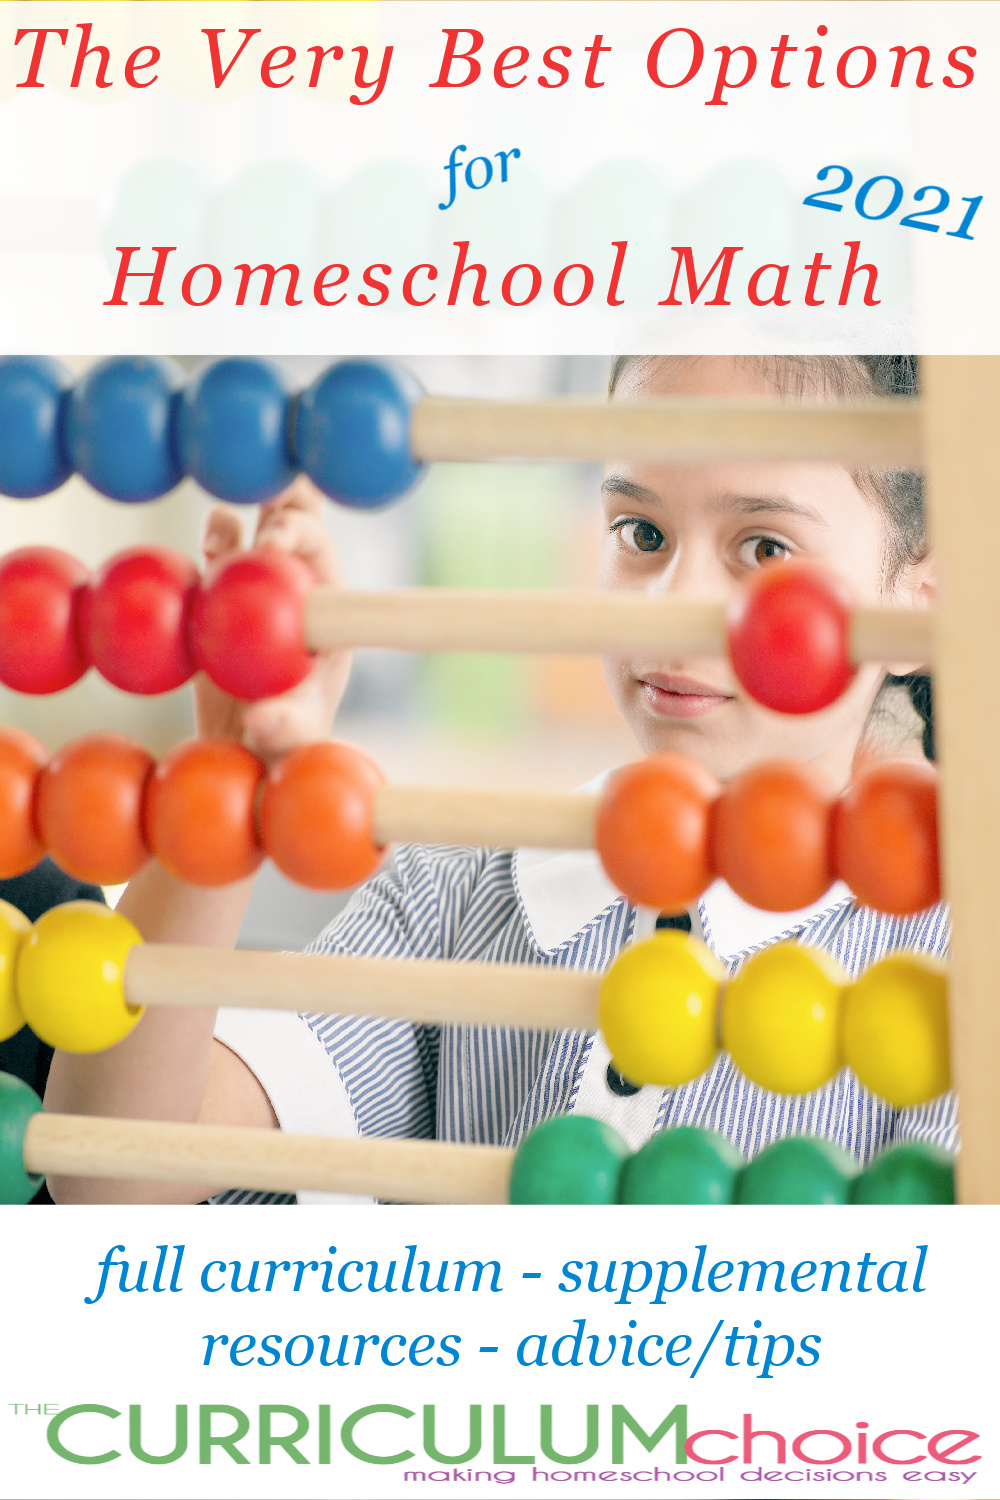 The Very Best Options for Homeschool Math (2021) includes full curriculum options, supplements, and even math advice from seasoned homeschool parents!